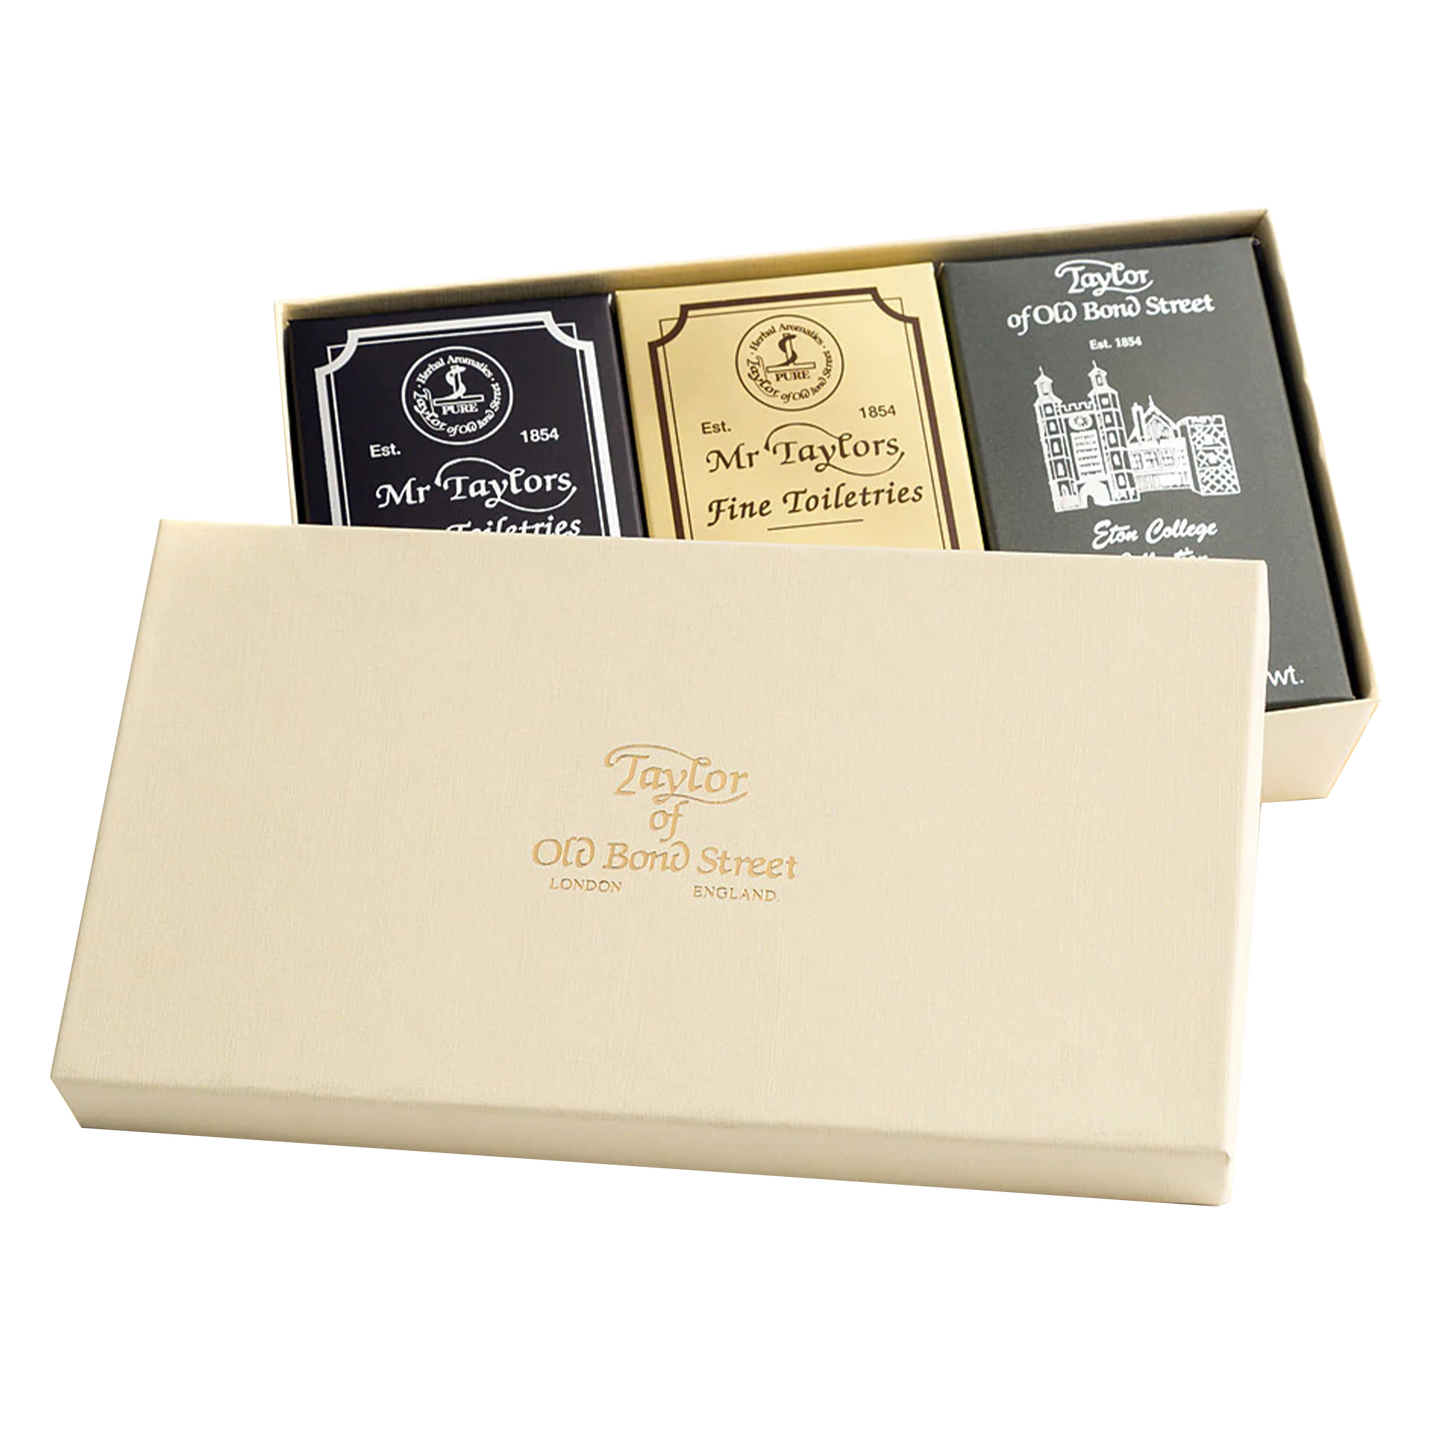 Taylor of Old Bond Street Mixed Bath Soap Gift Box: 3 x 200g Bath Soaps presented in a luxurious gift box (Sandalwood, Eton College Collection and Mr Taylor).